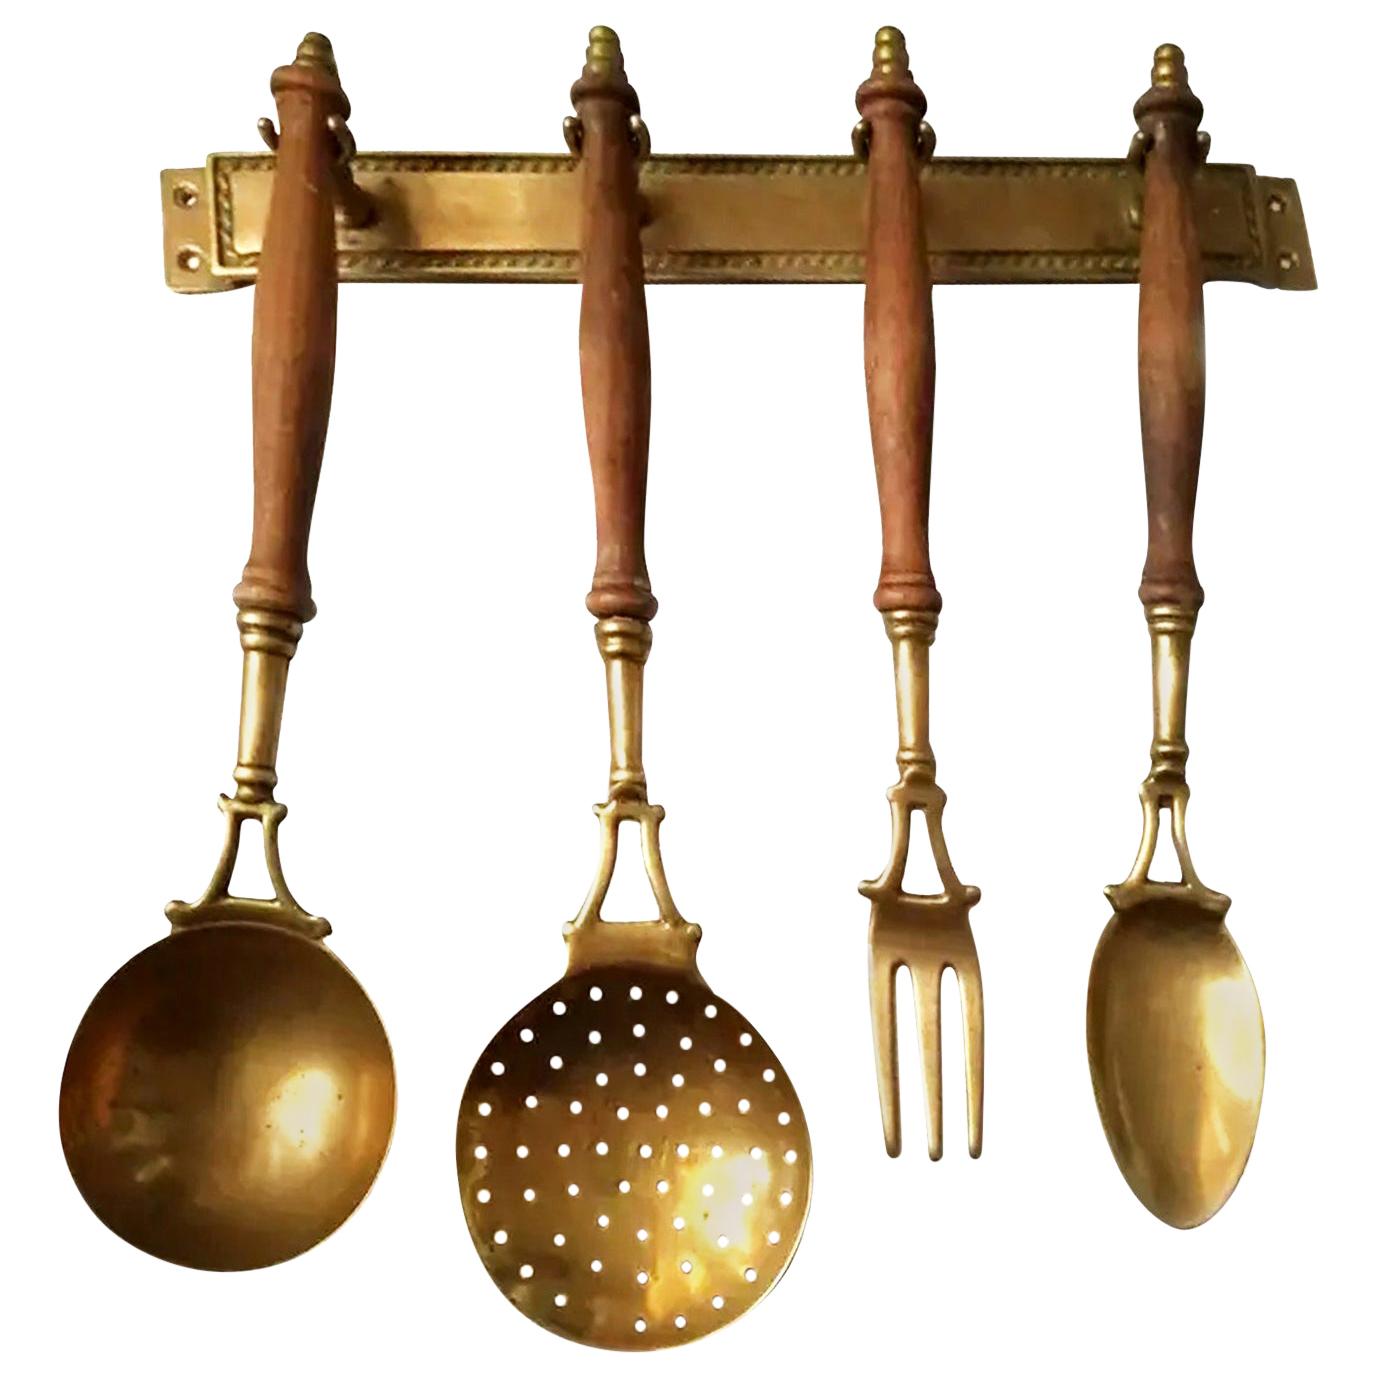 Spanish Kitchen Utensils Made of Brass with Hanging Bar, Early 20th Century